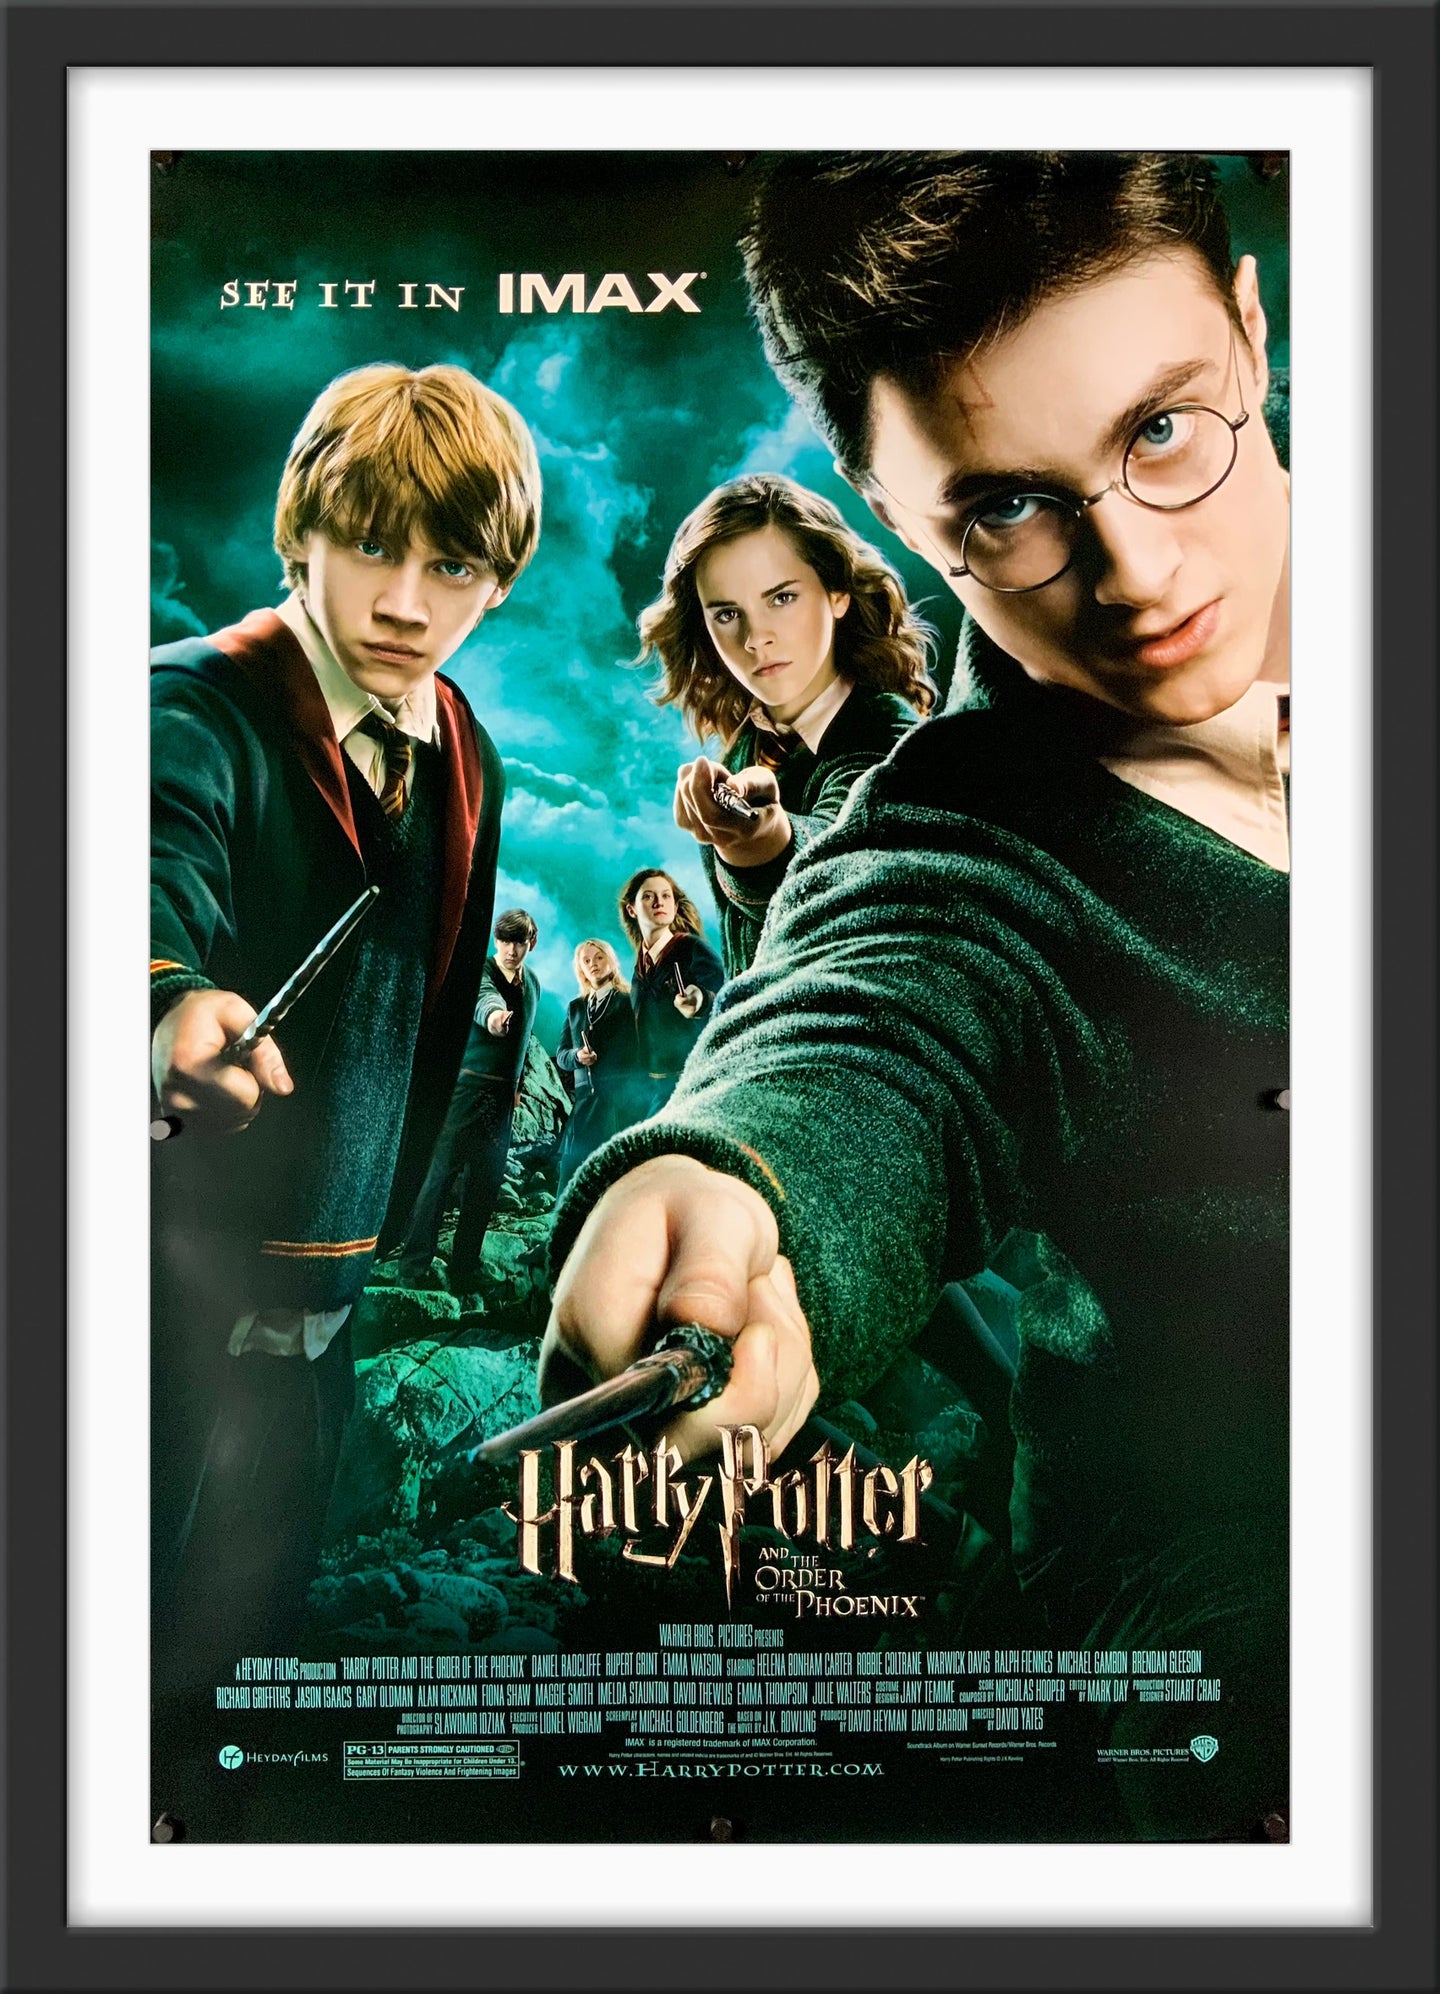 An original movie poster for the film Harry Potter and the Order of the Phoenix